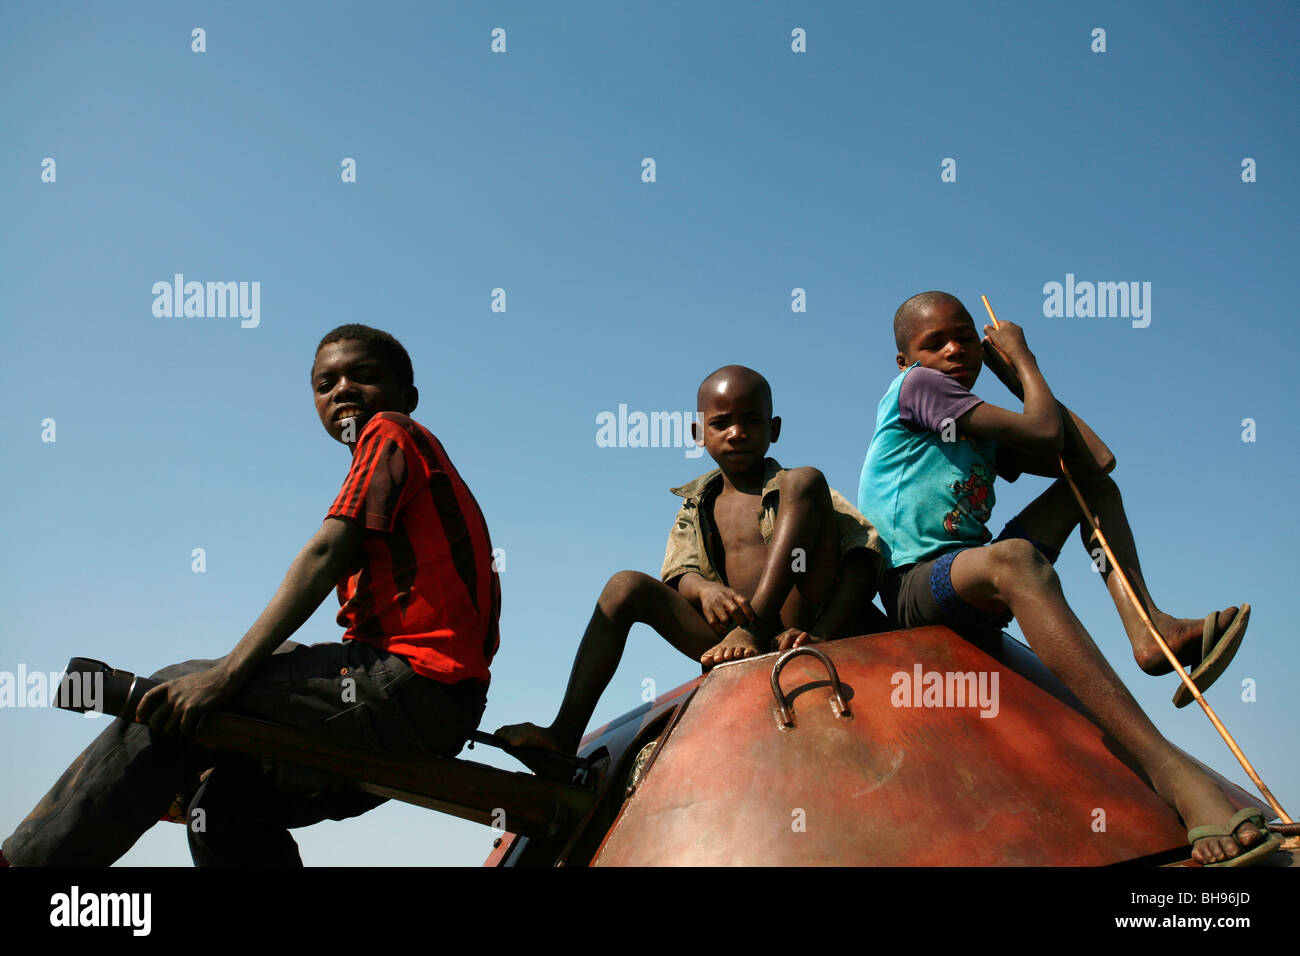 Angolan children play on an old tank on a former battle field at Cuito Cuanavale, Angola, Africa. Stock Photo